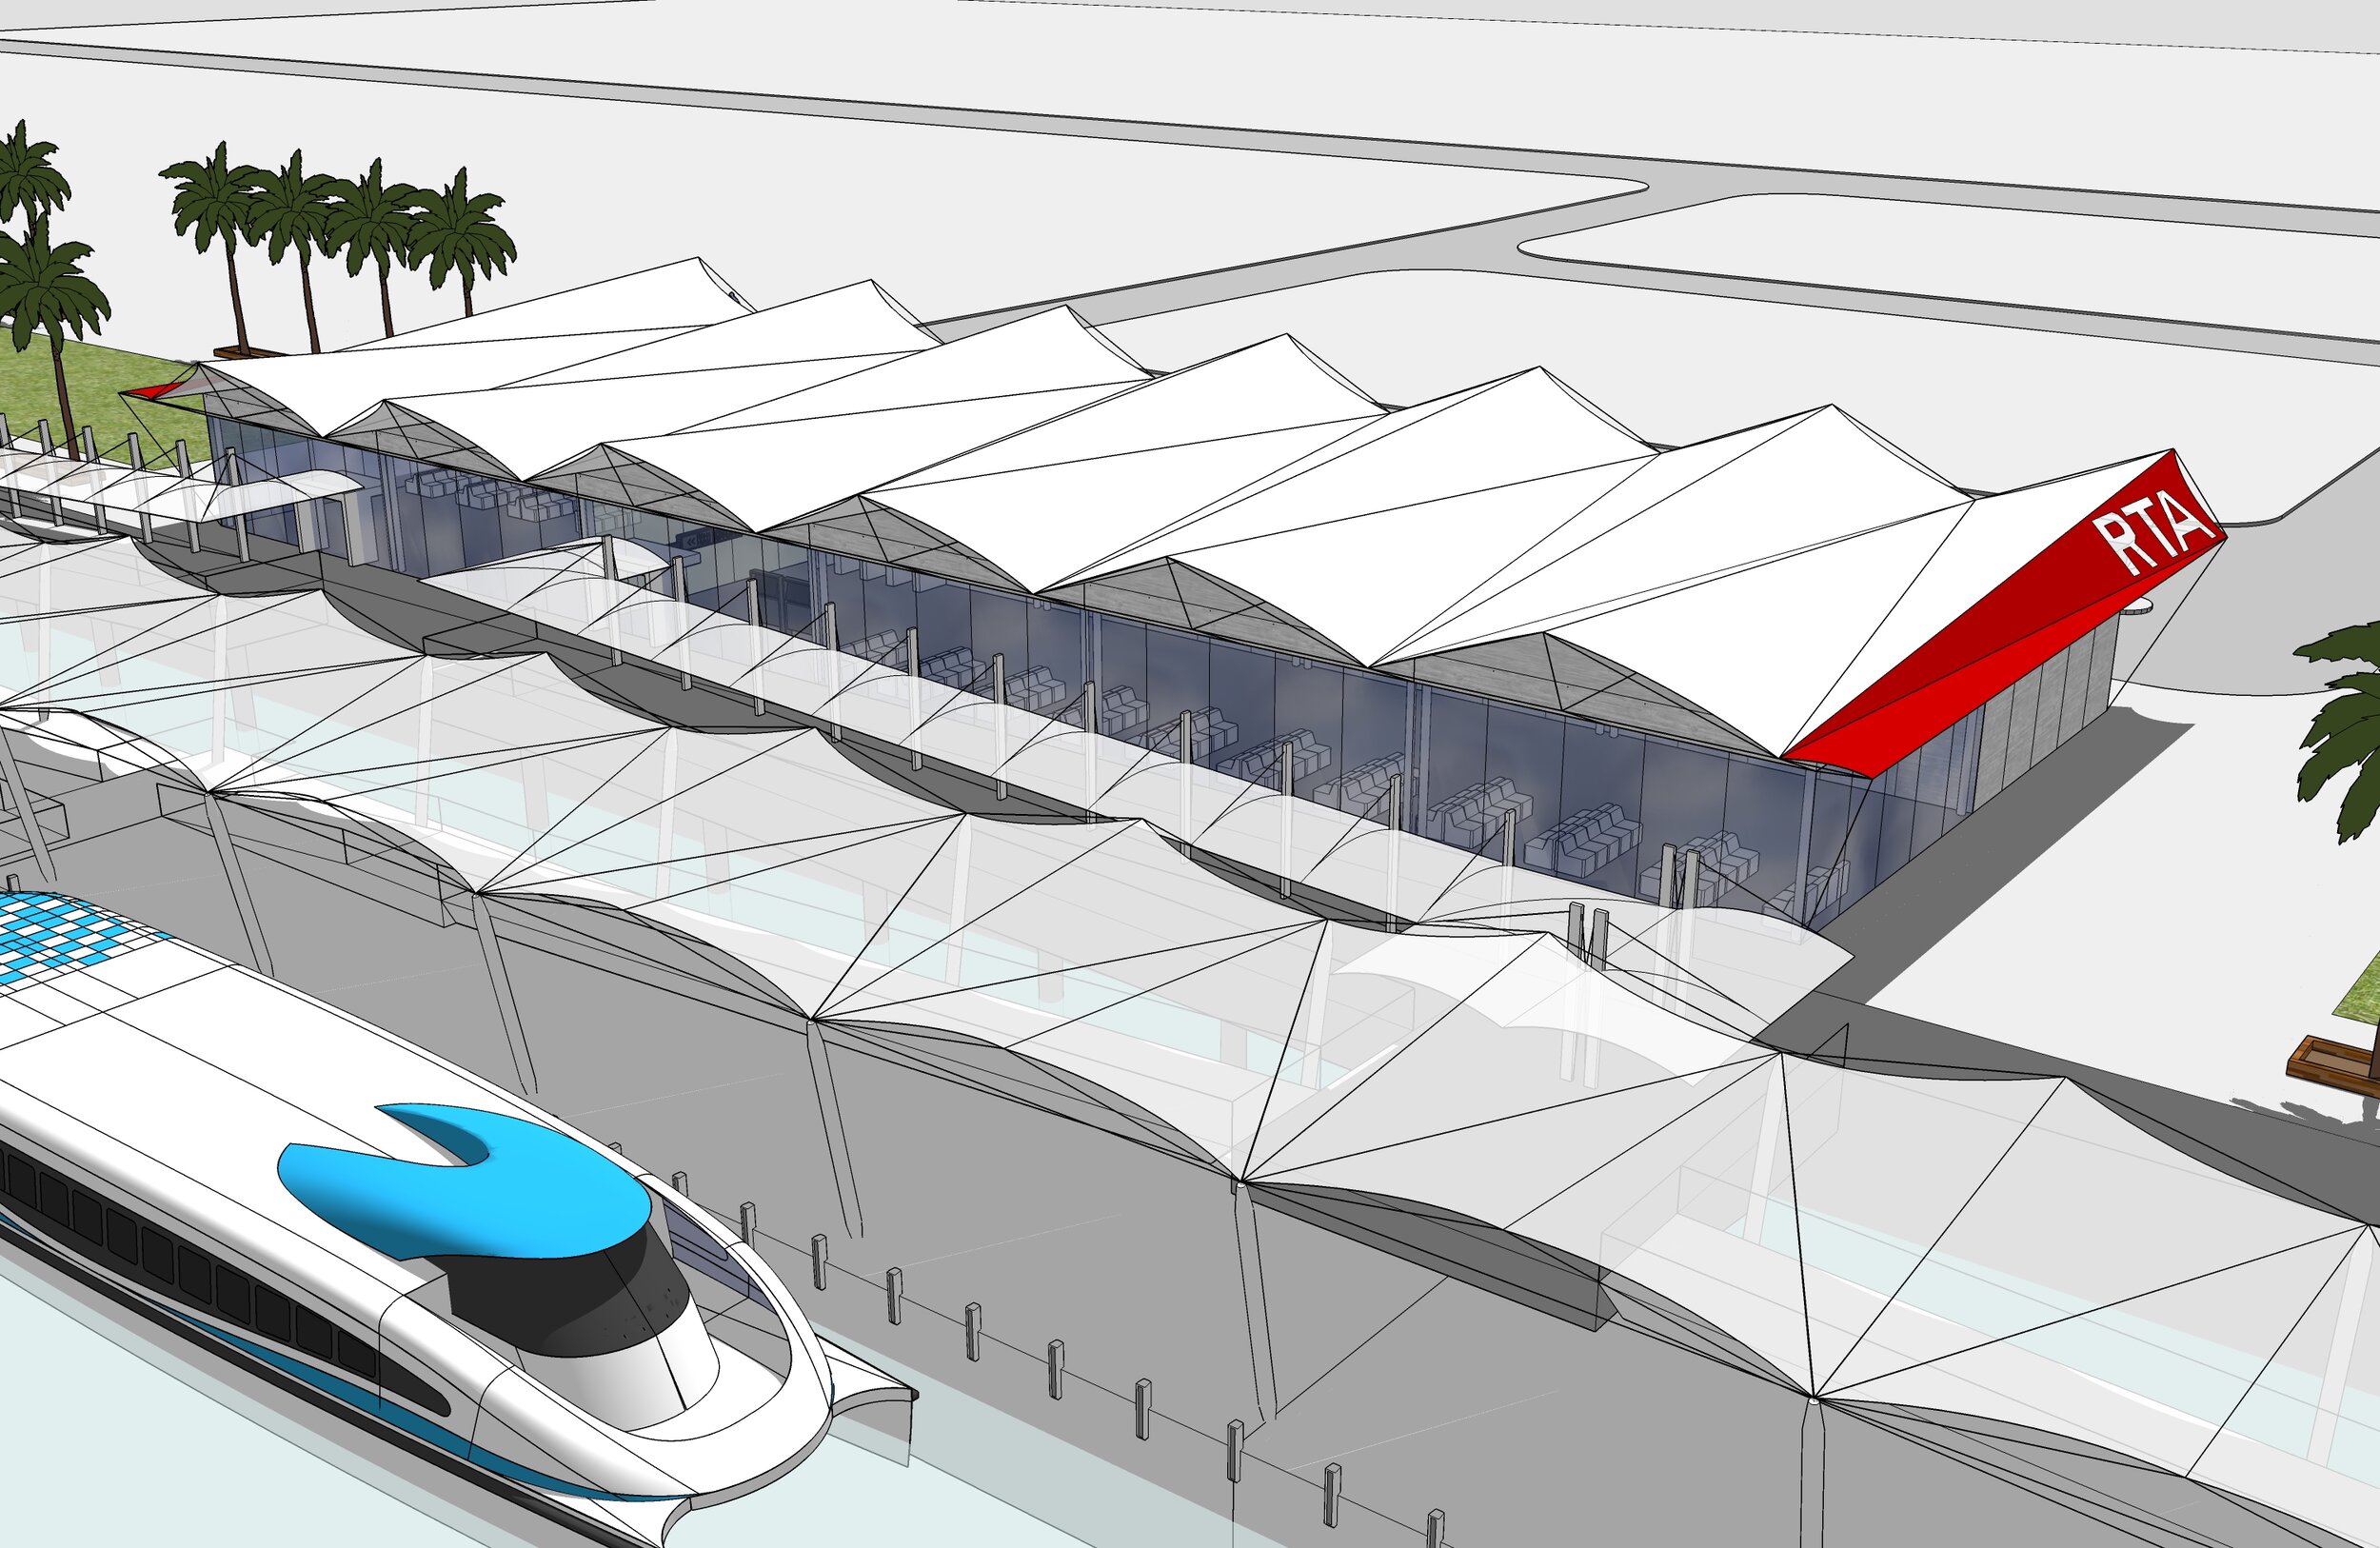 View of the 3D model of a proposed water transport station as part of the Master Plan